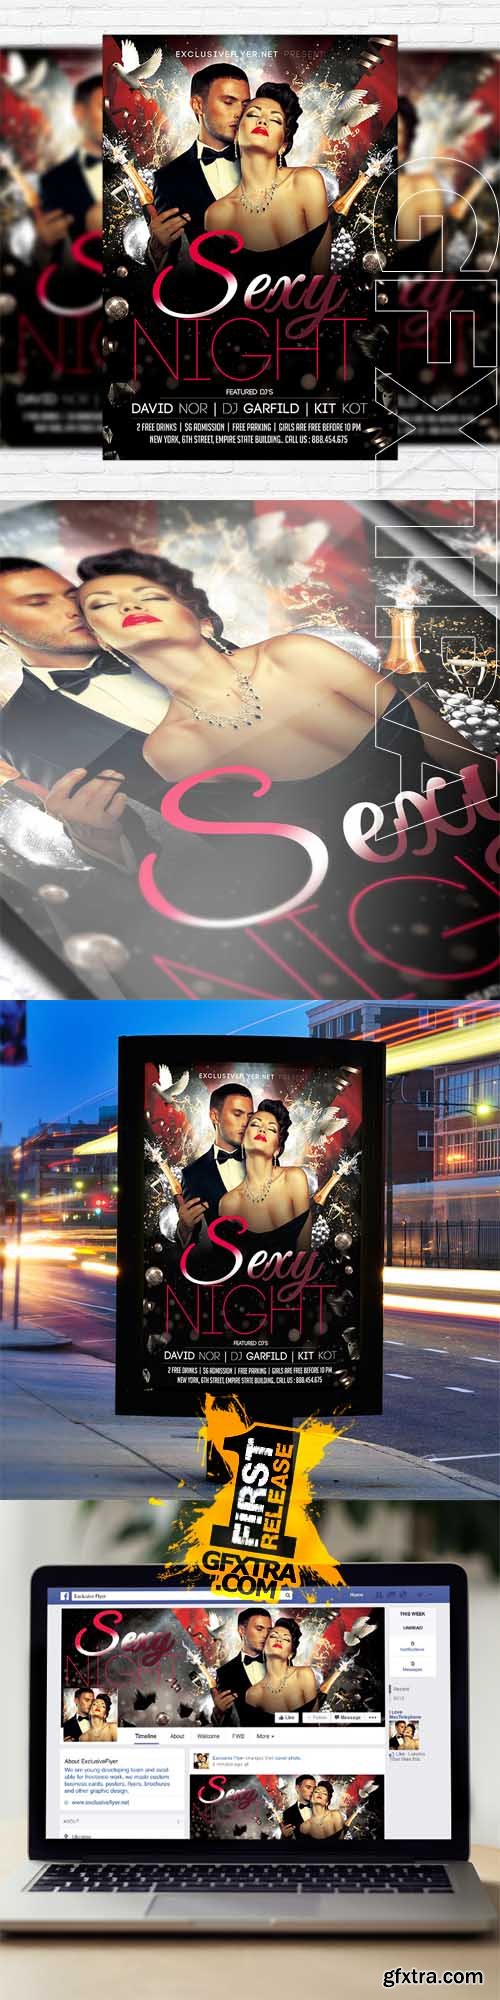 Sexy Night Vol.2 – Flyer Template + Facebook Cover